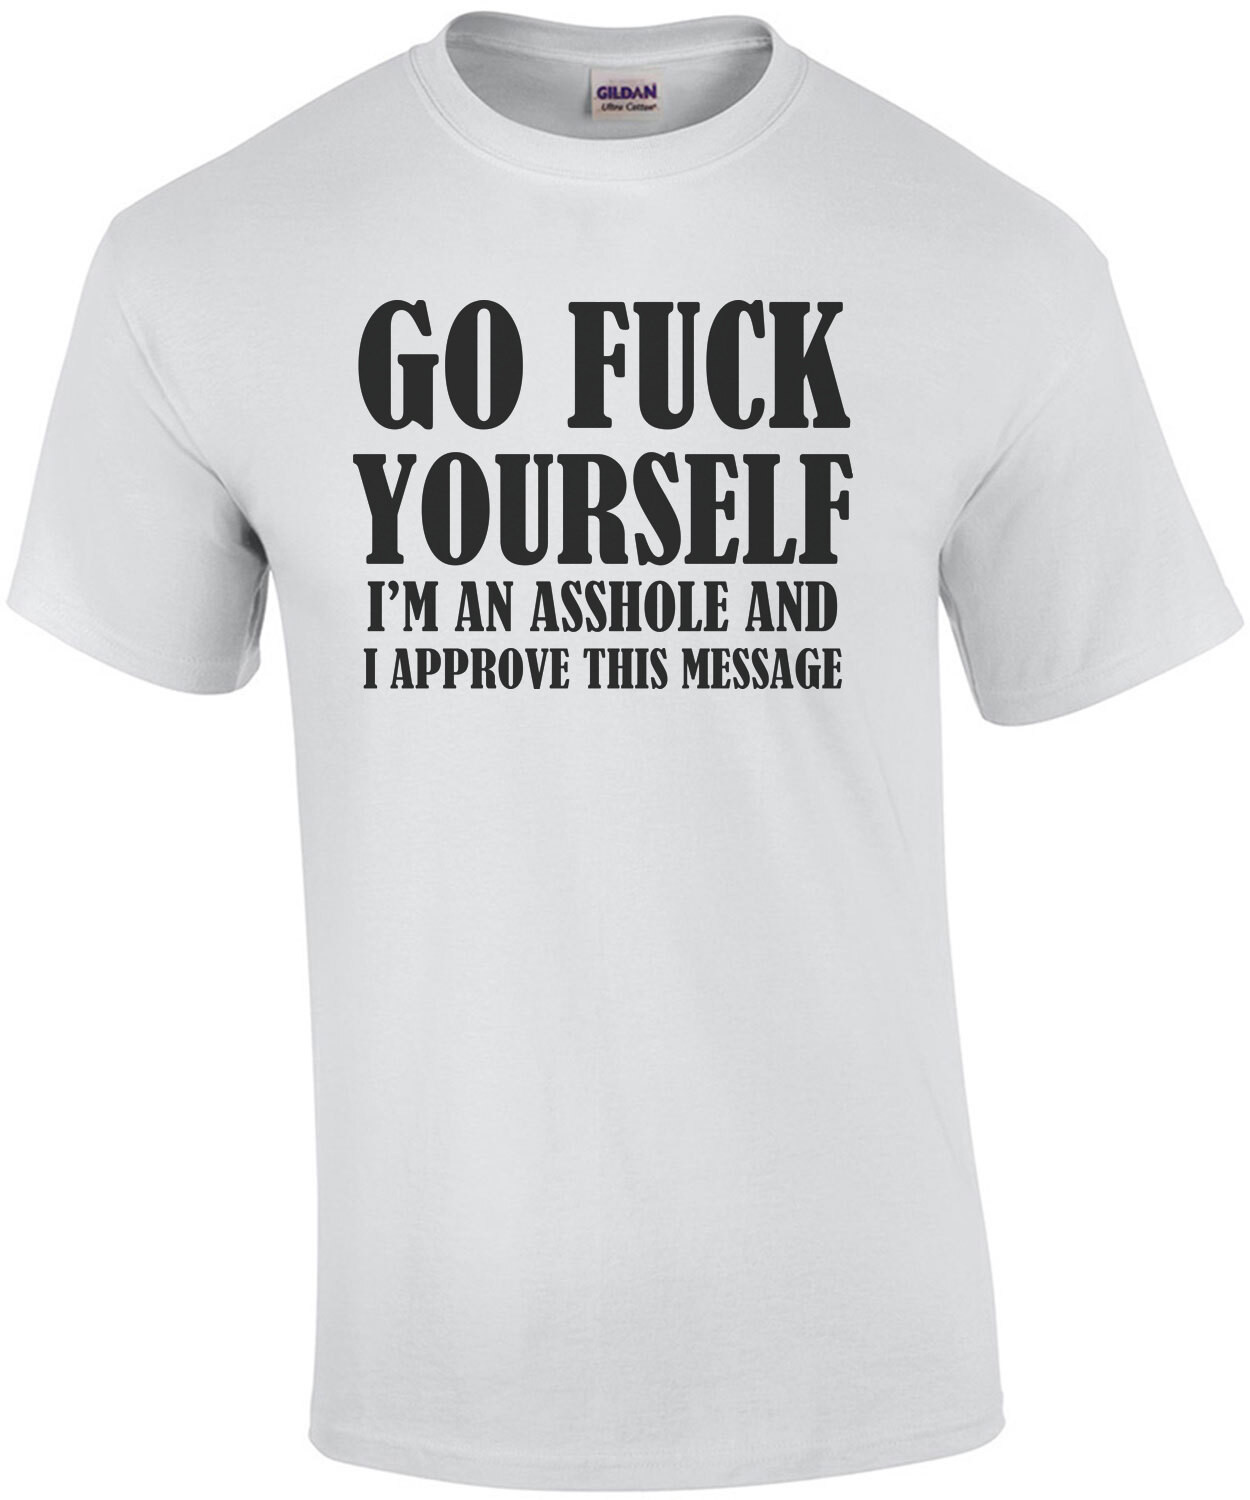 Go fuck yourself - I'm an asshole and I approve this message. Offensive Rude T-Shirt